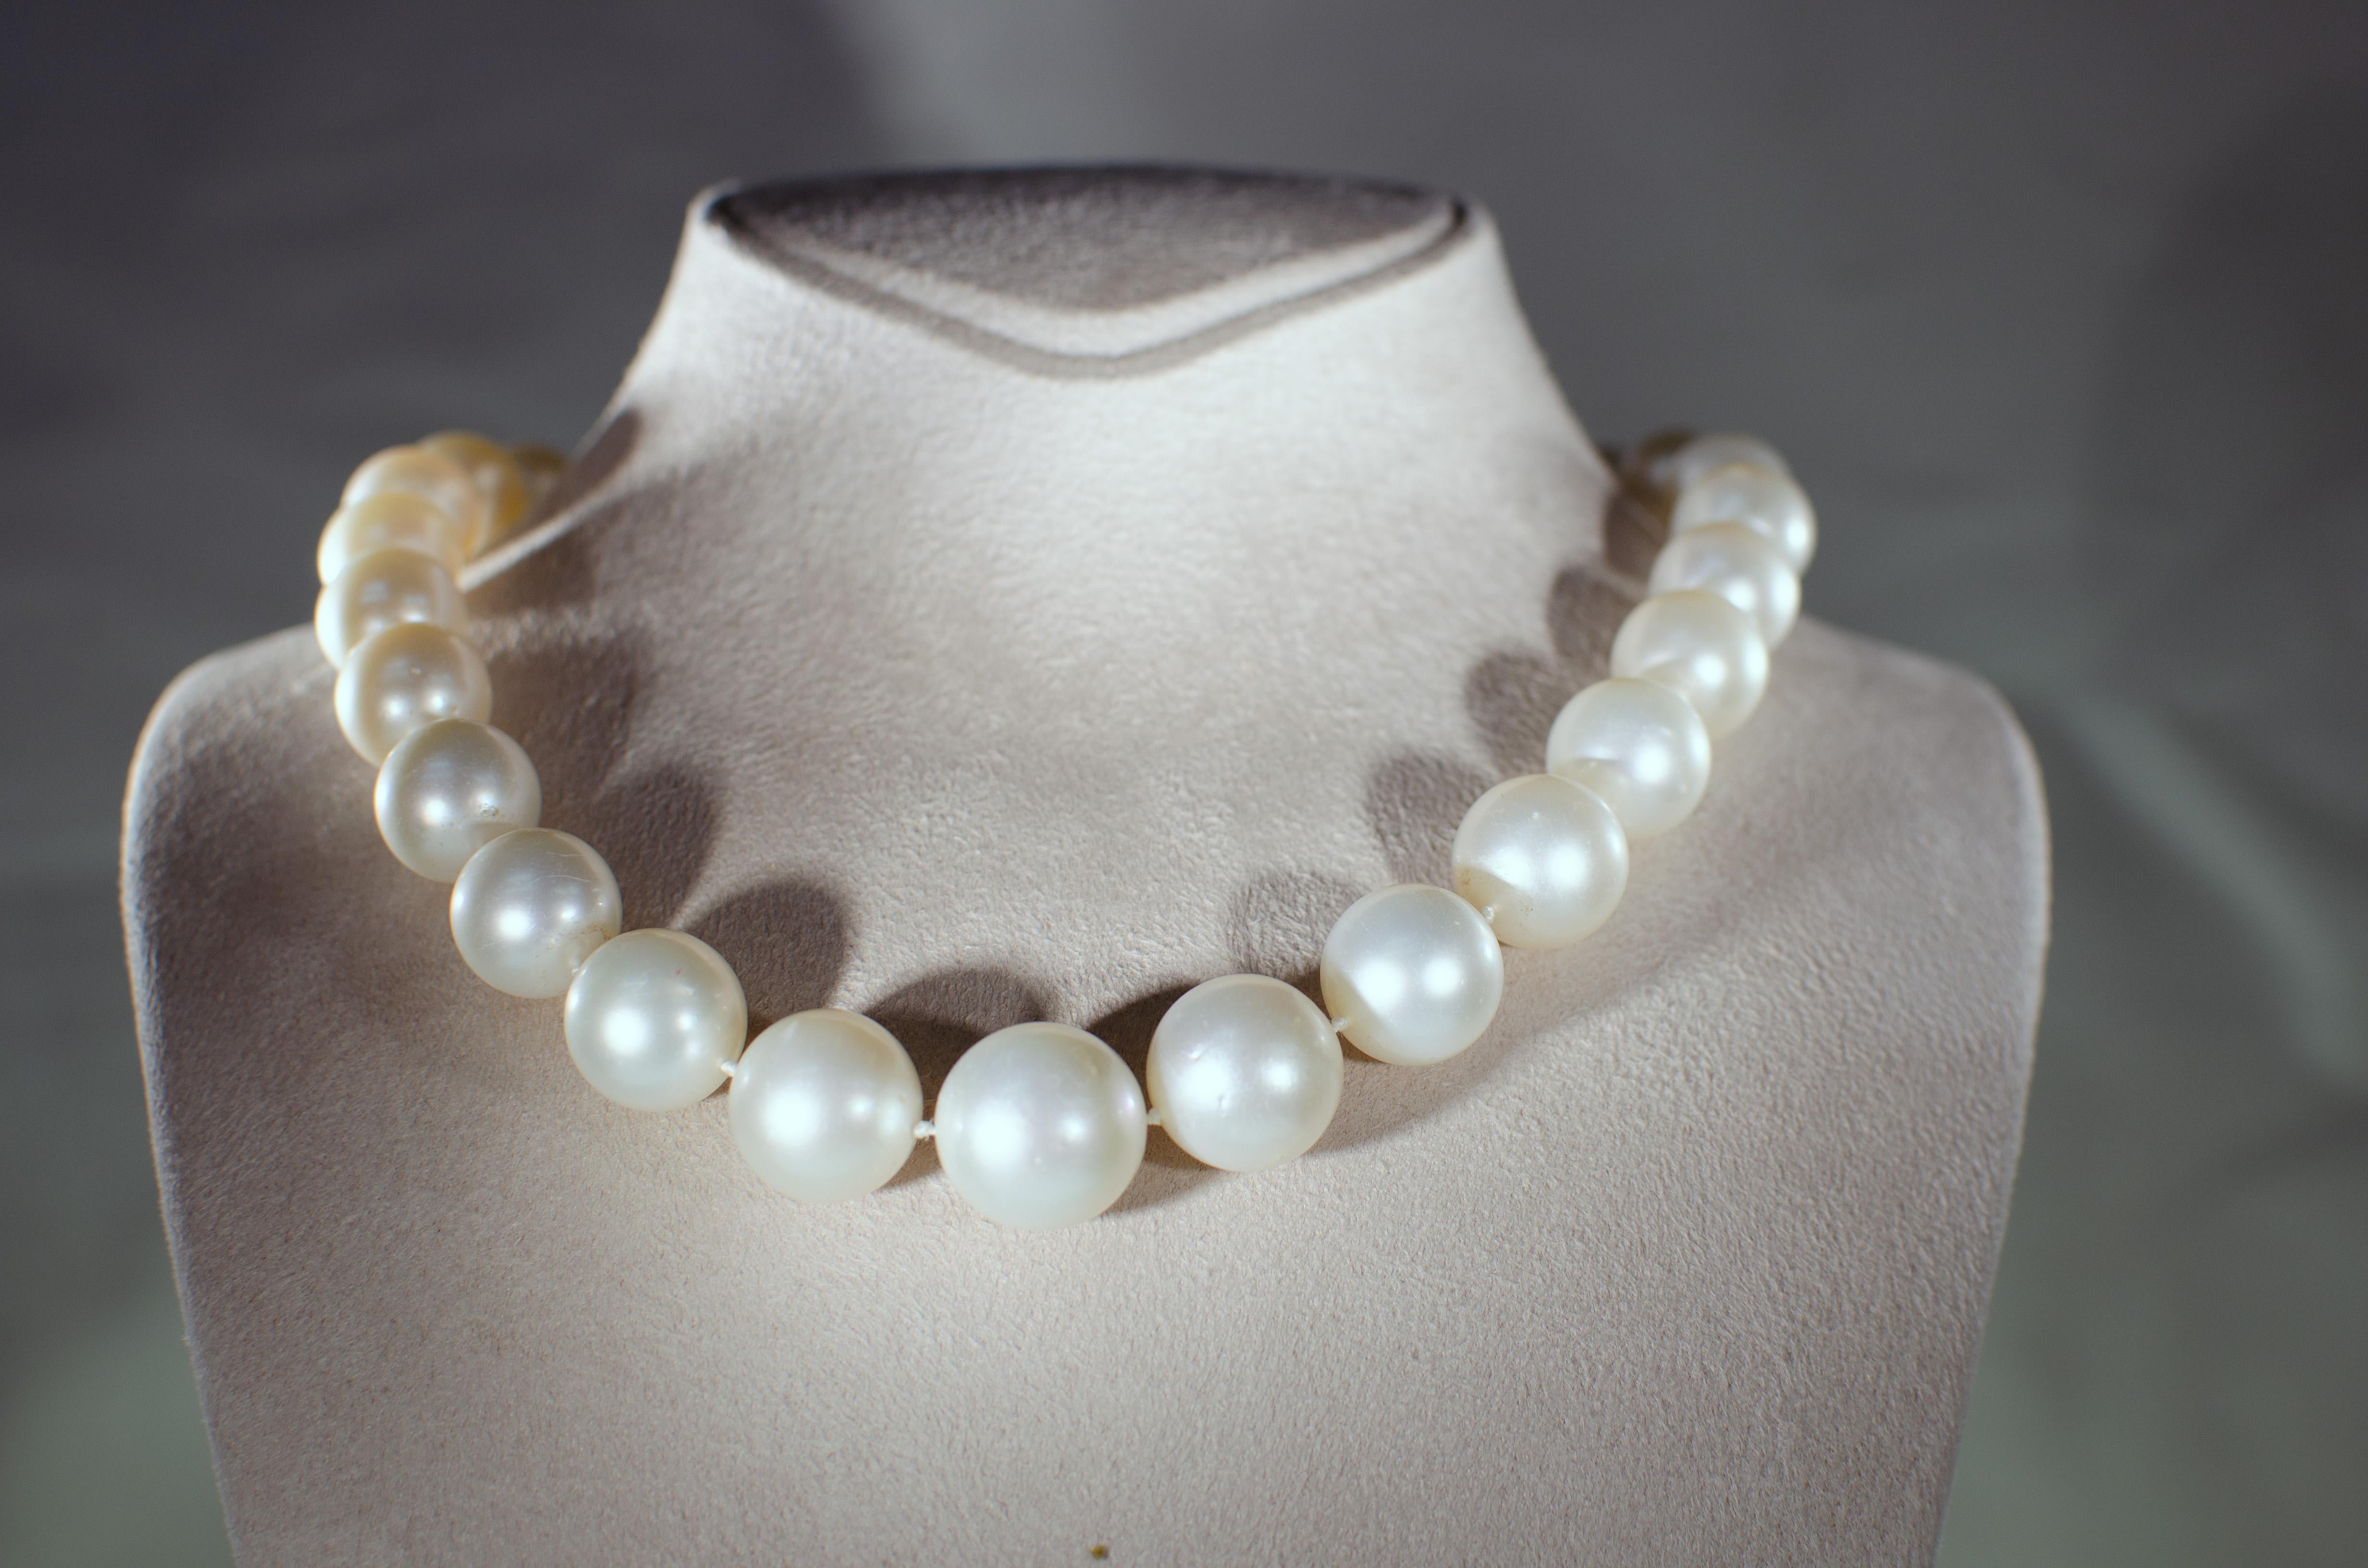 Composed of twenty-nine cultured pearls, measuring approximately 12 to 16 mm.

Completed by a diamond-set spherical clasp 18 k White Gold.

The Diamonds together weighing approximately 6 carats.

Length approximately 480 mm.

Necklace Details:

18 k